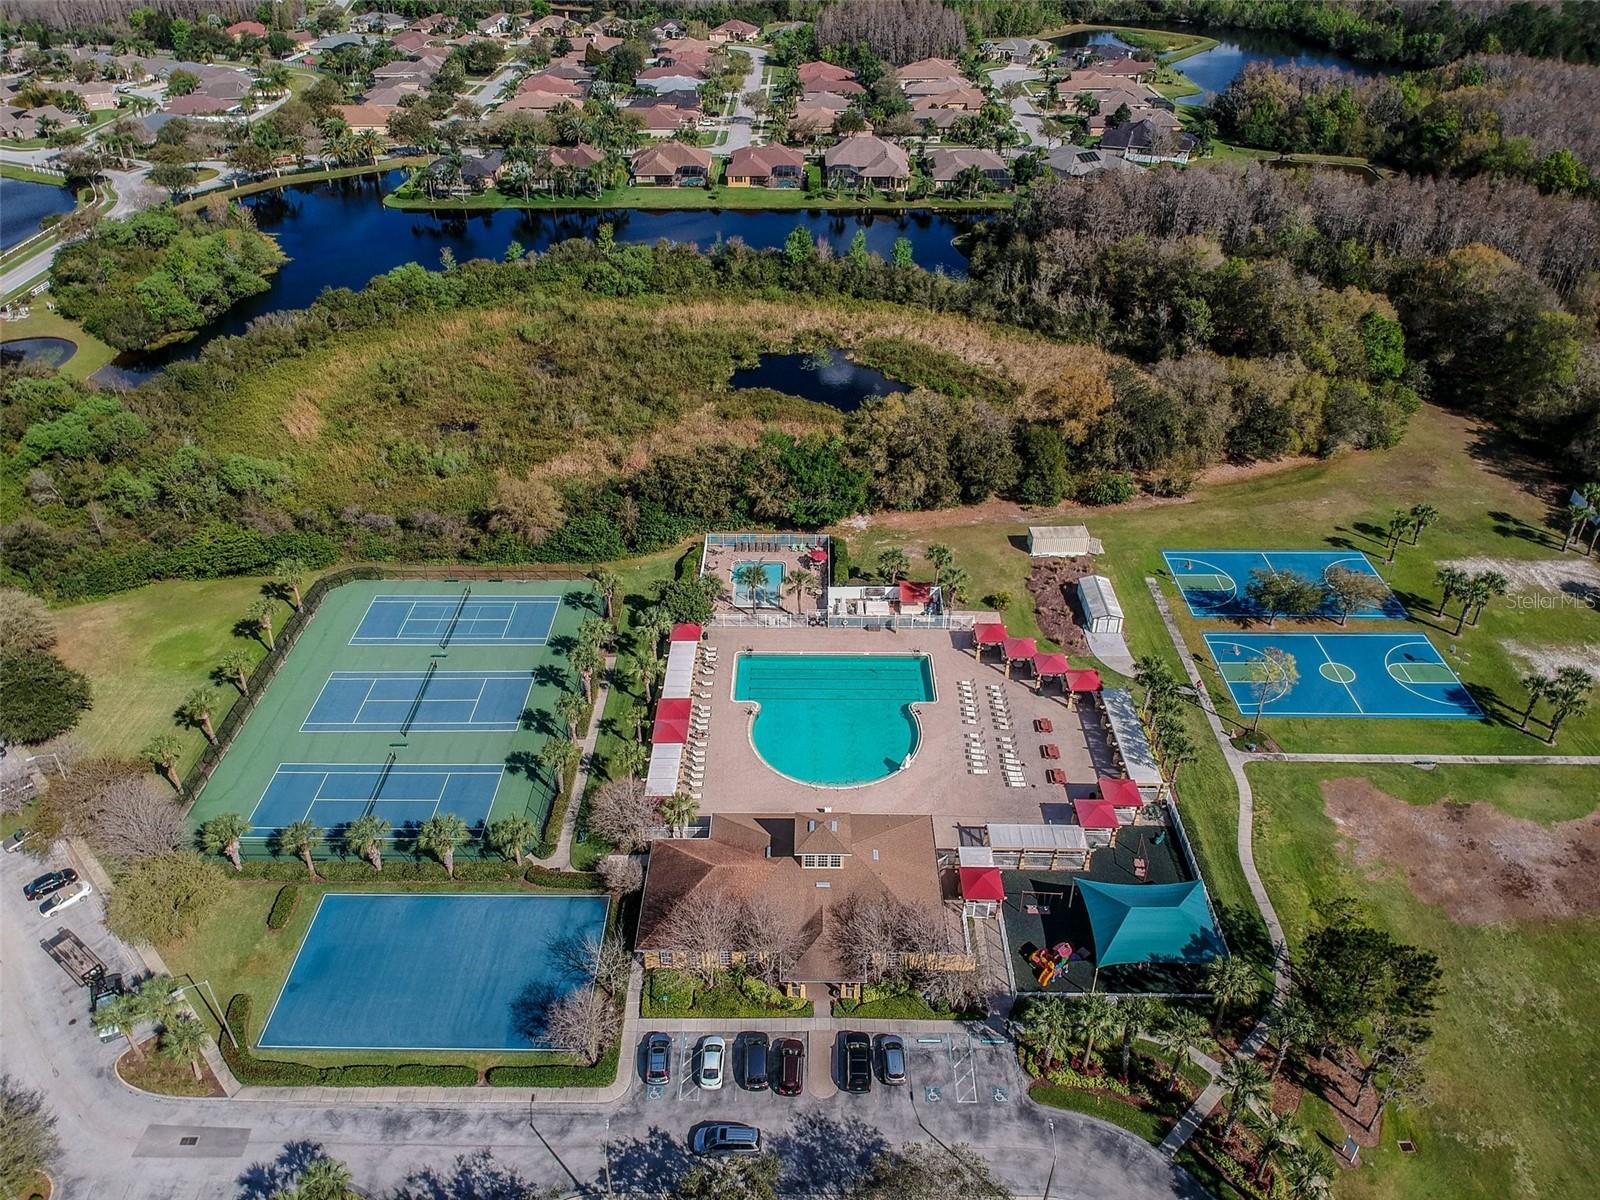 Community amenities include pool with swim lanes and kiddie pool/splash pad, tennis courts, covered park and basketball courts